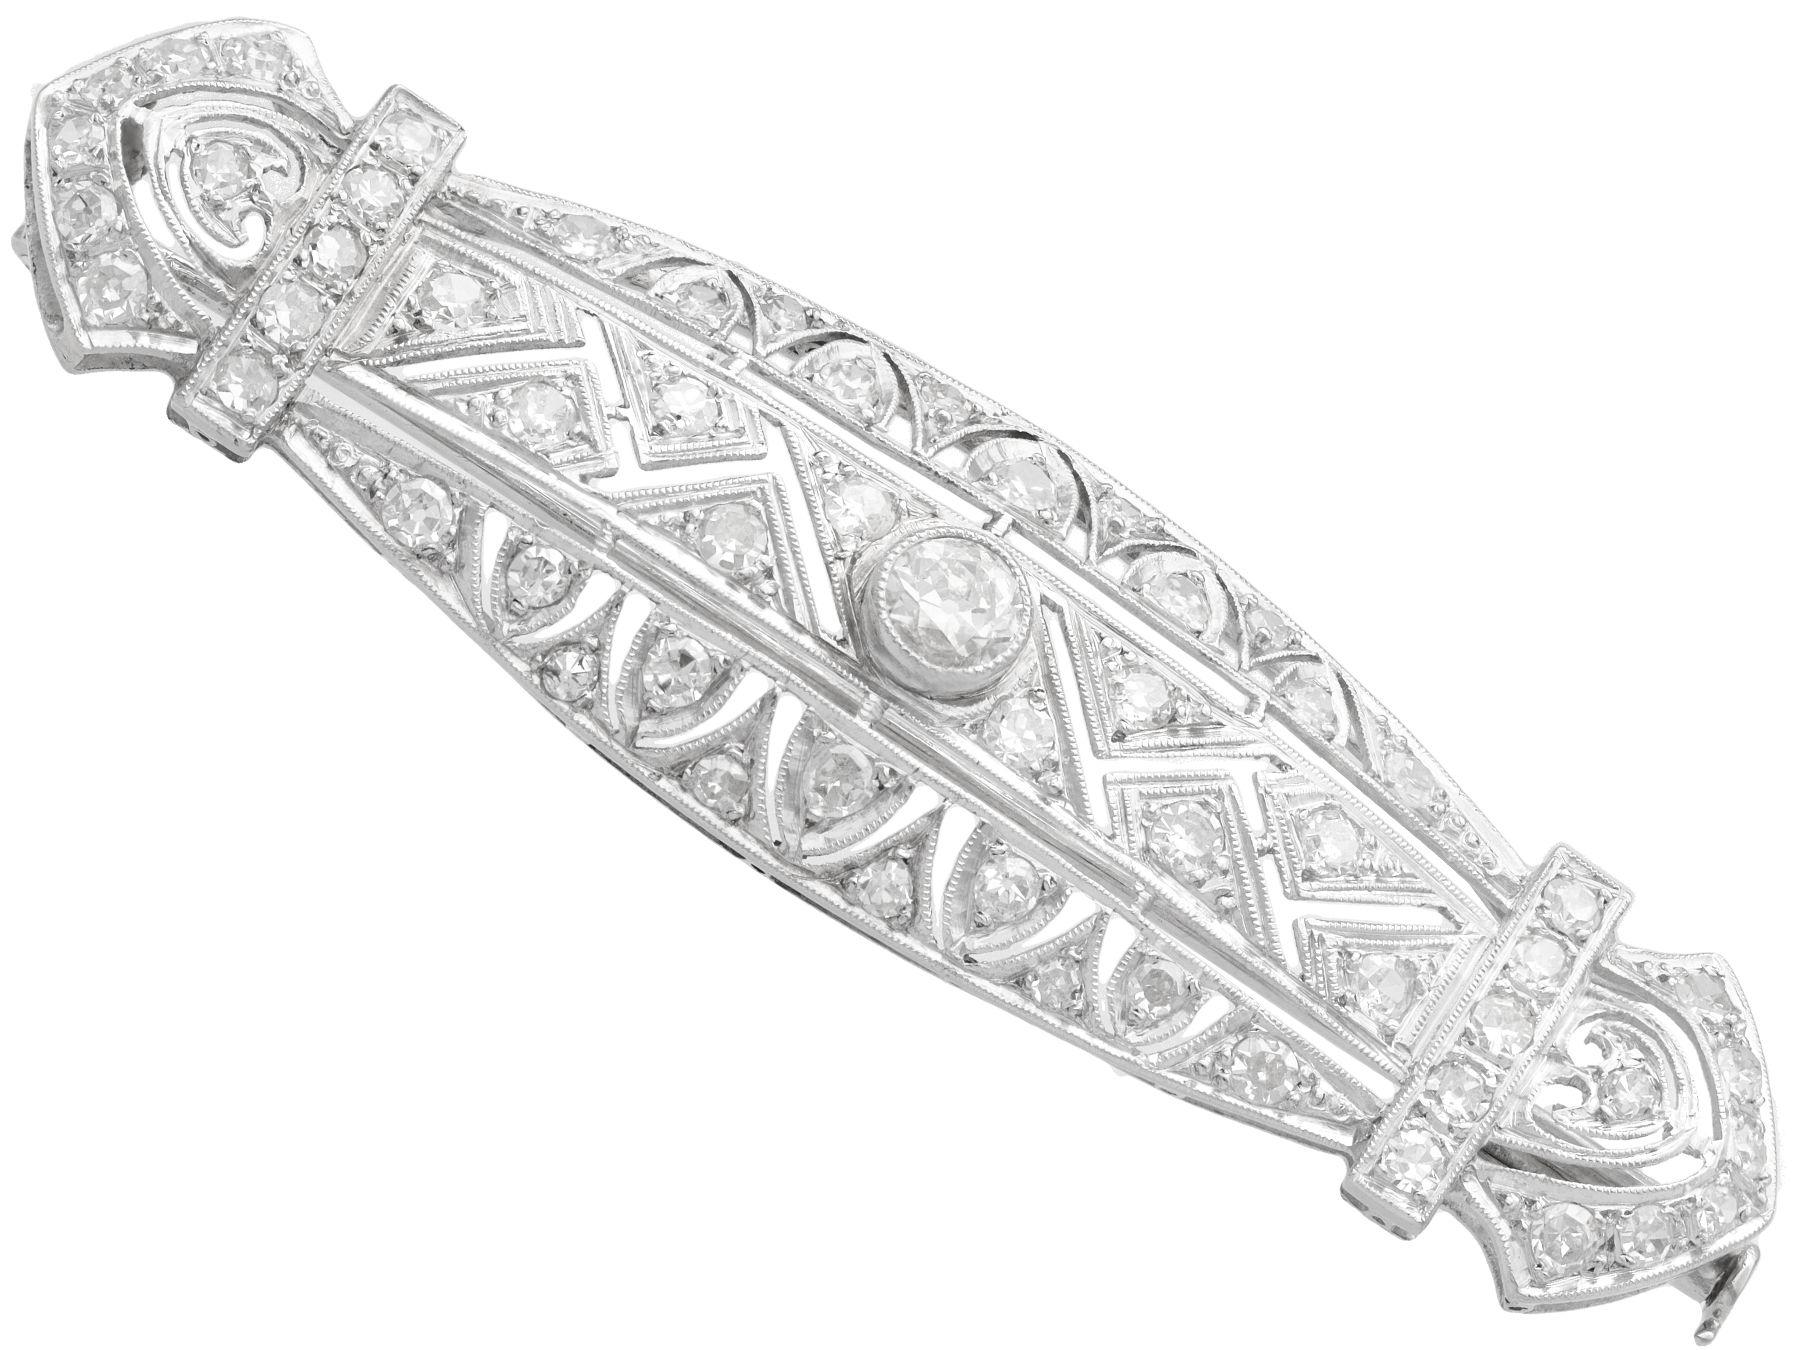 Antique Art Deco 2.13 Carat Diamond Brooch in Platinum In Excellent Condition For Sale In Jesmond, Newcastle Upon Tyne